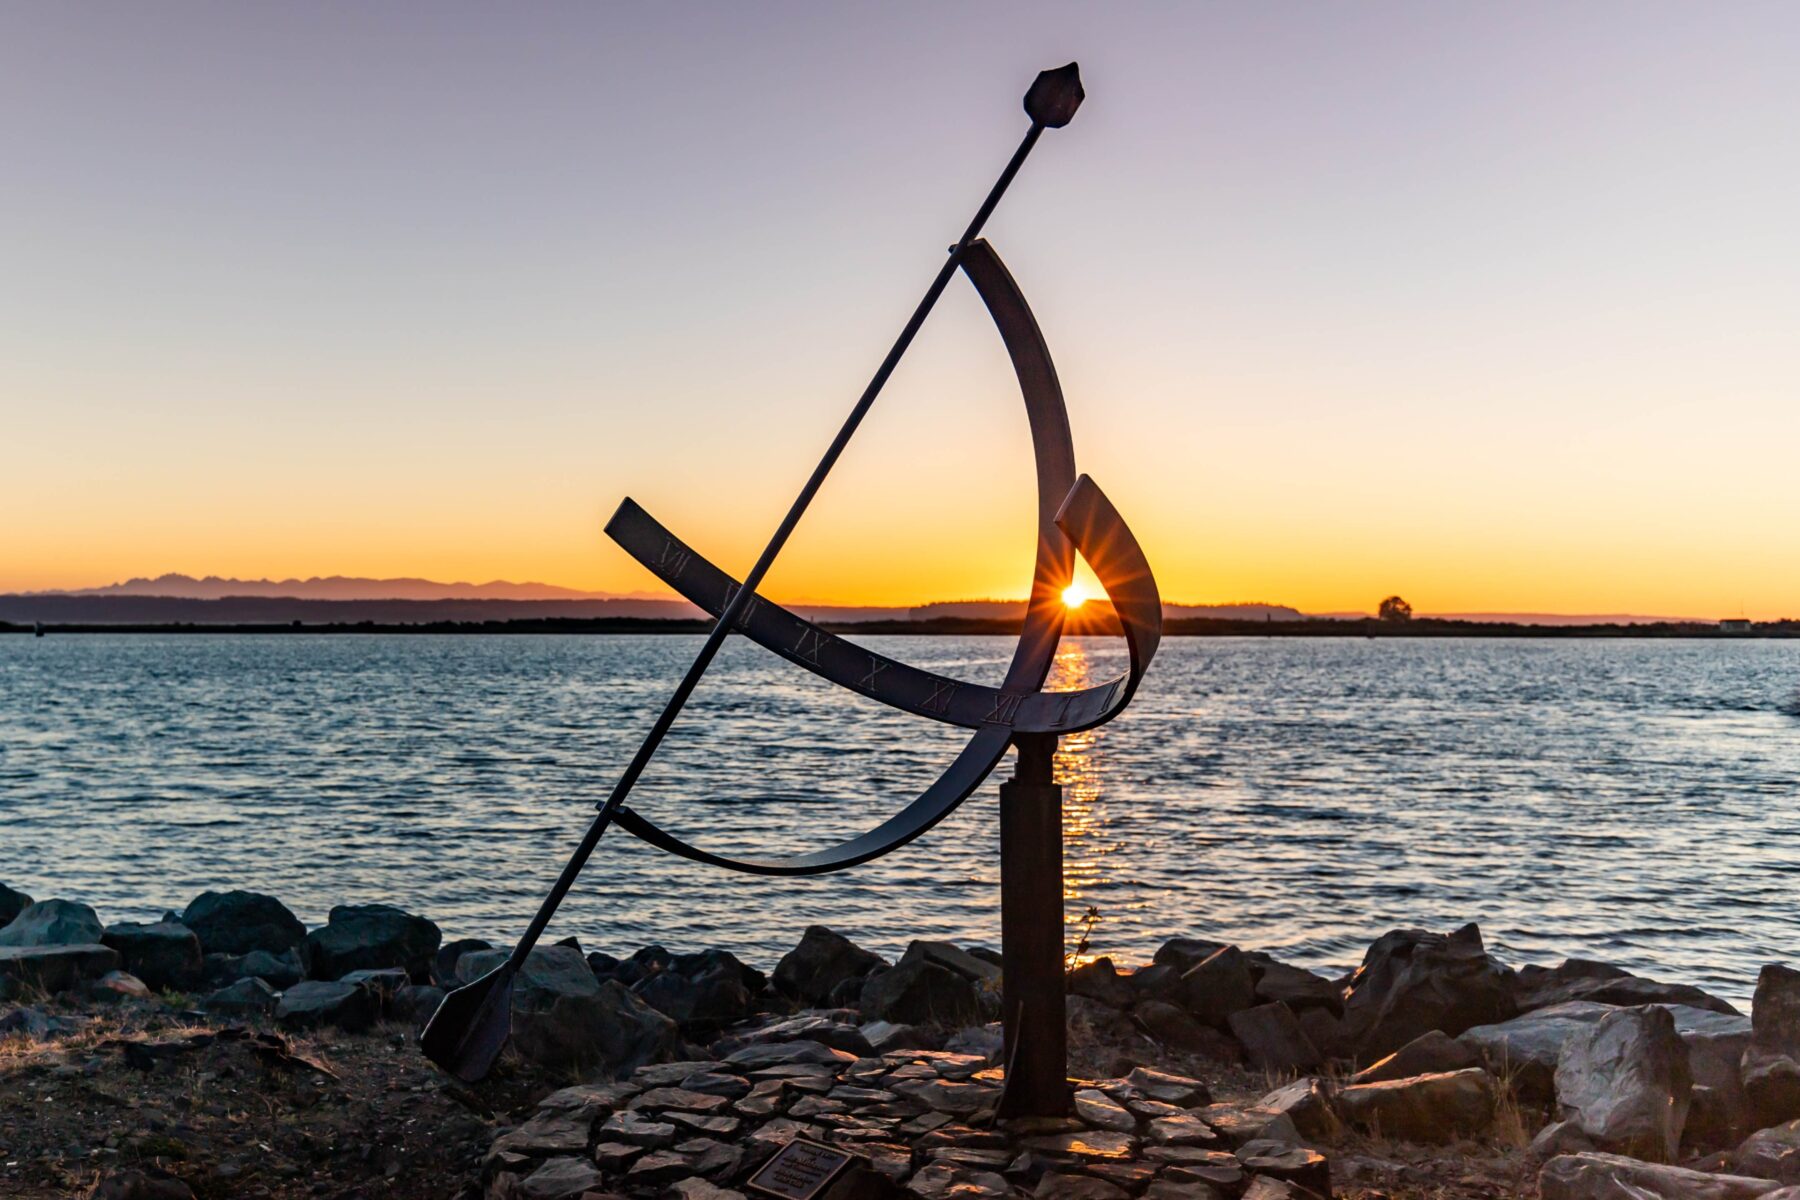 abstract sculpture on the edge of the water